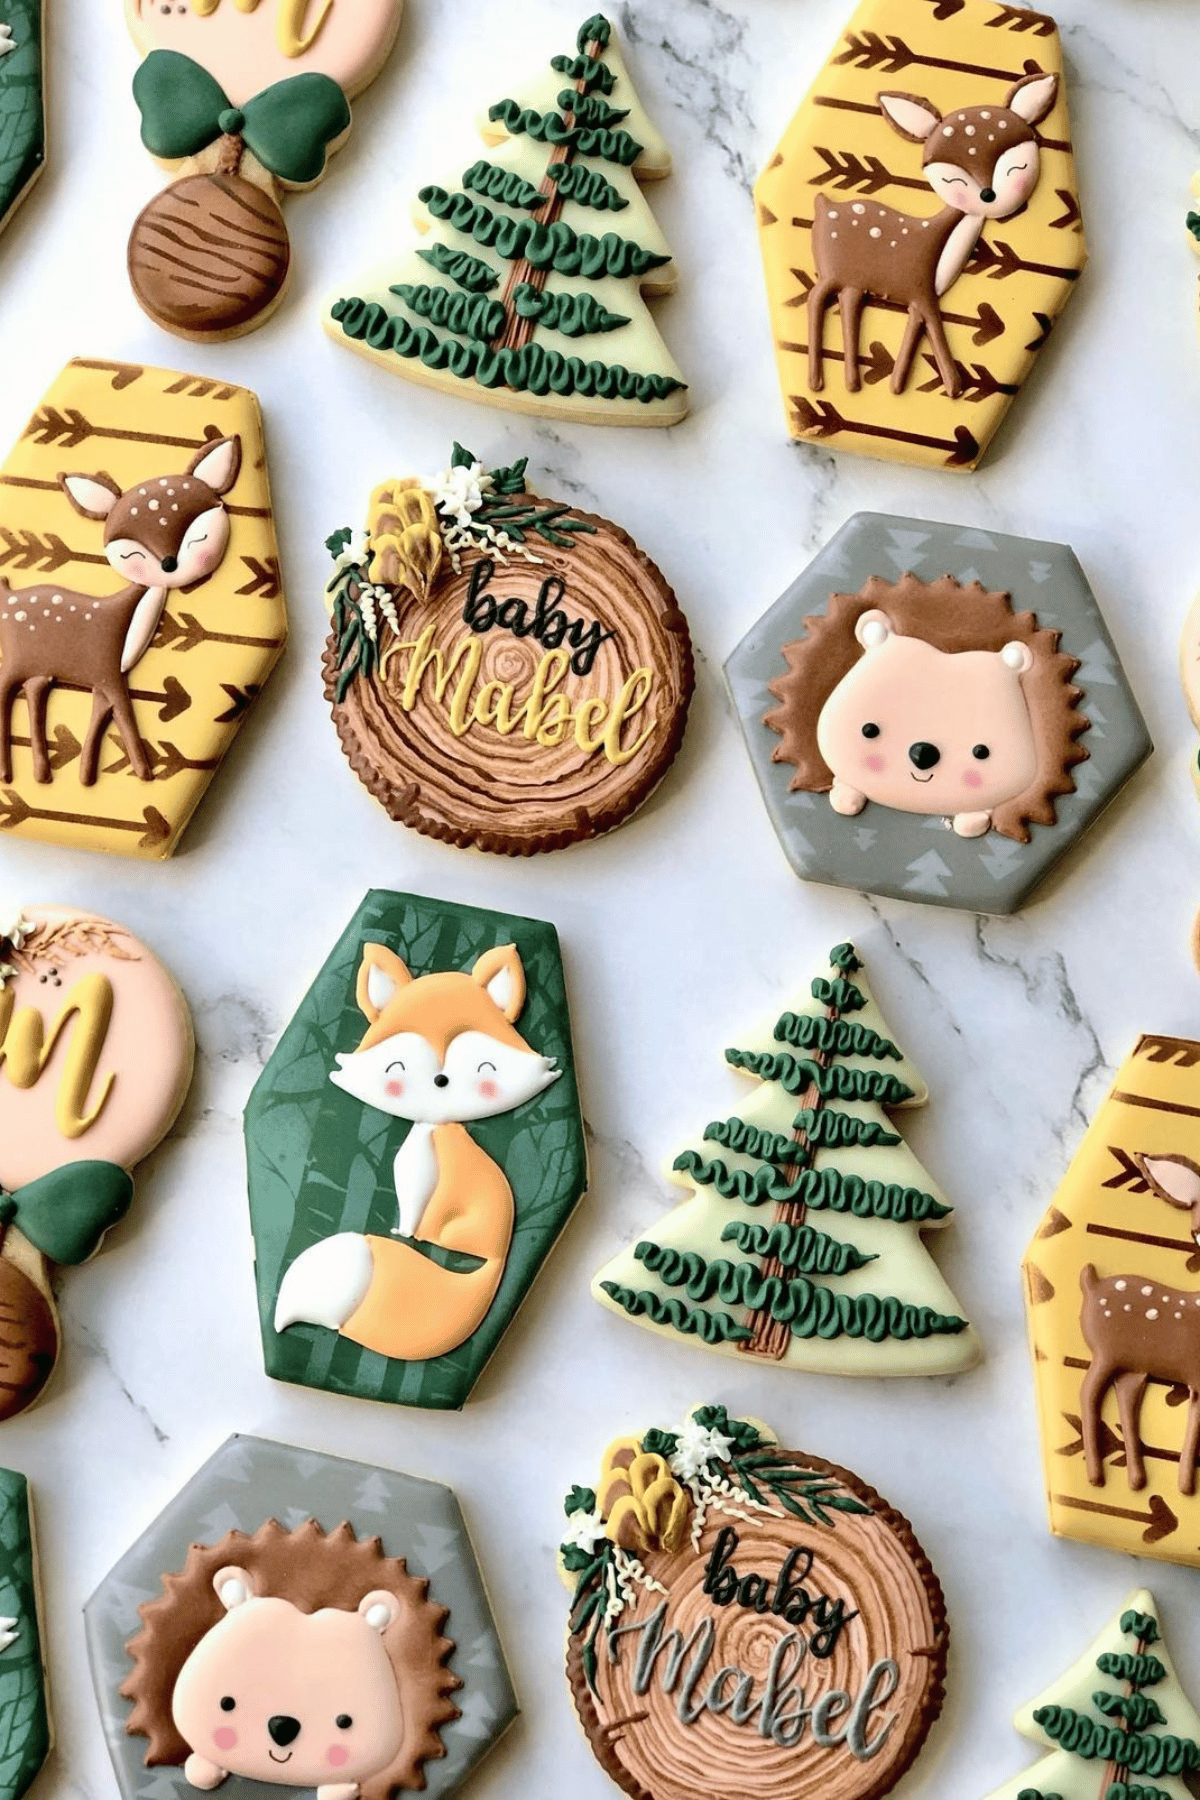 woodland themed cookies with hedgehogs, foxes and pine trees